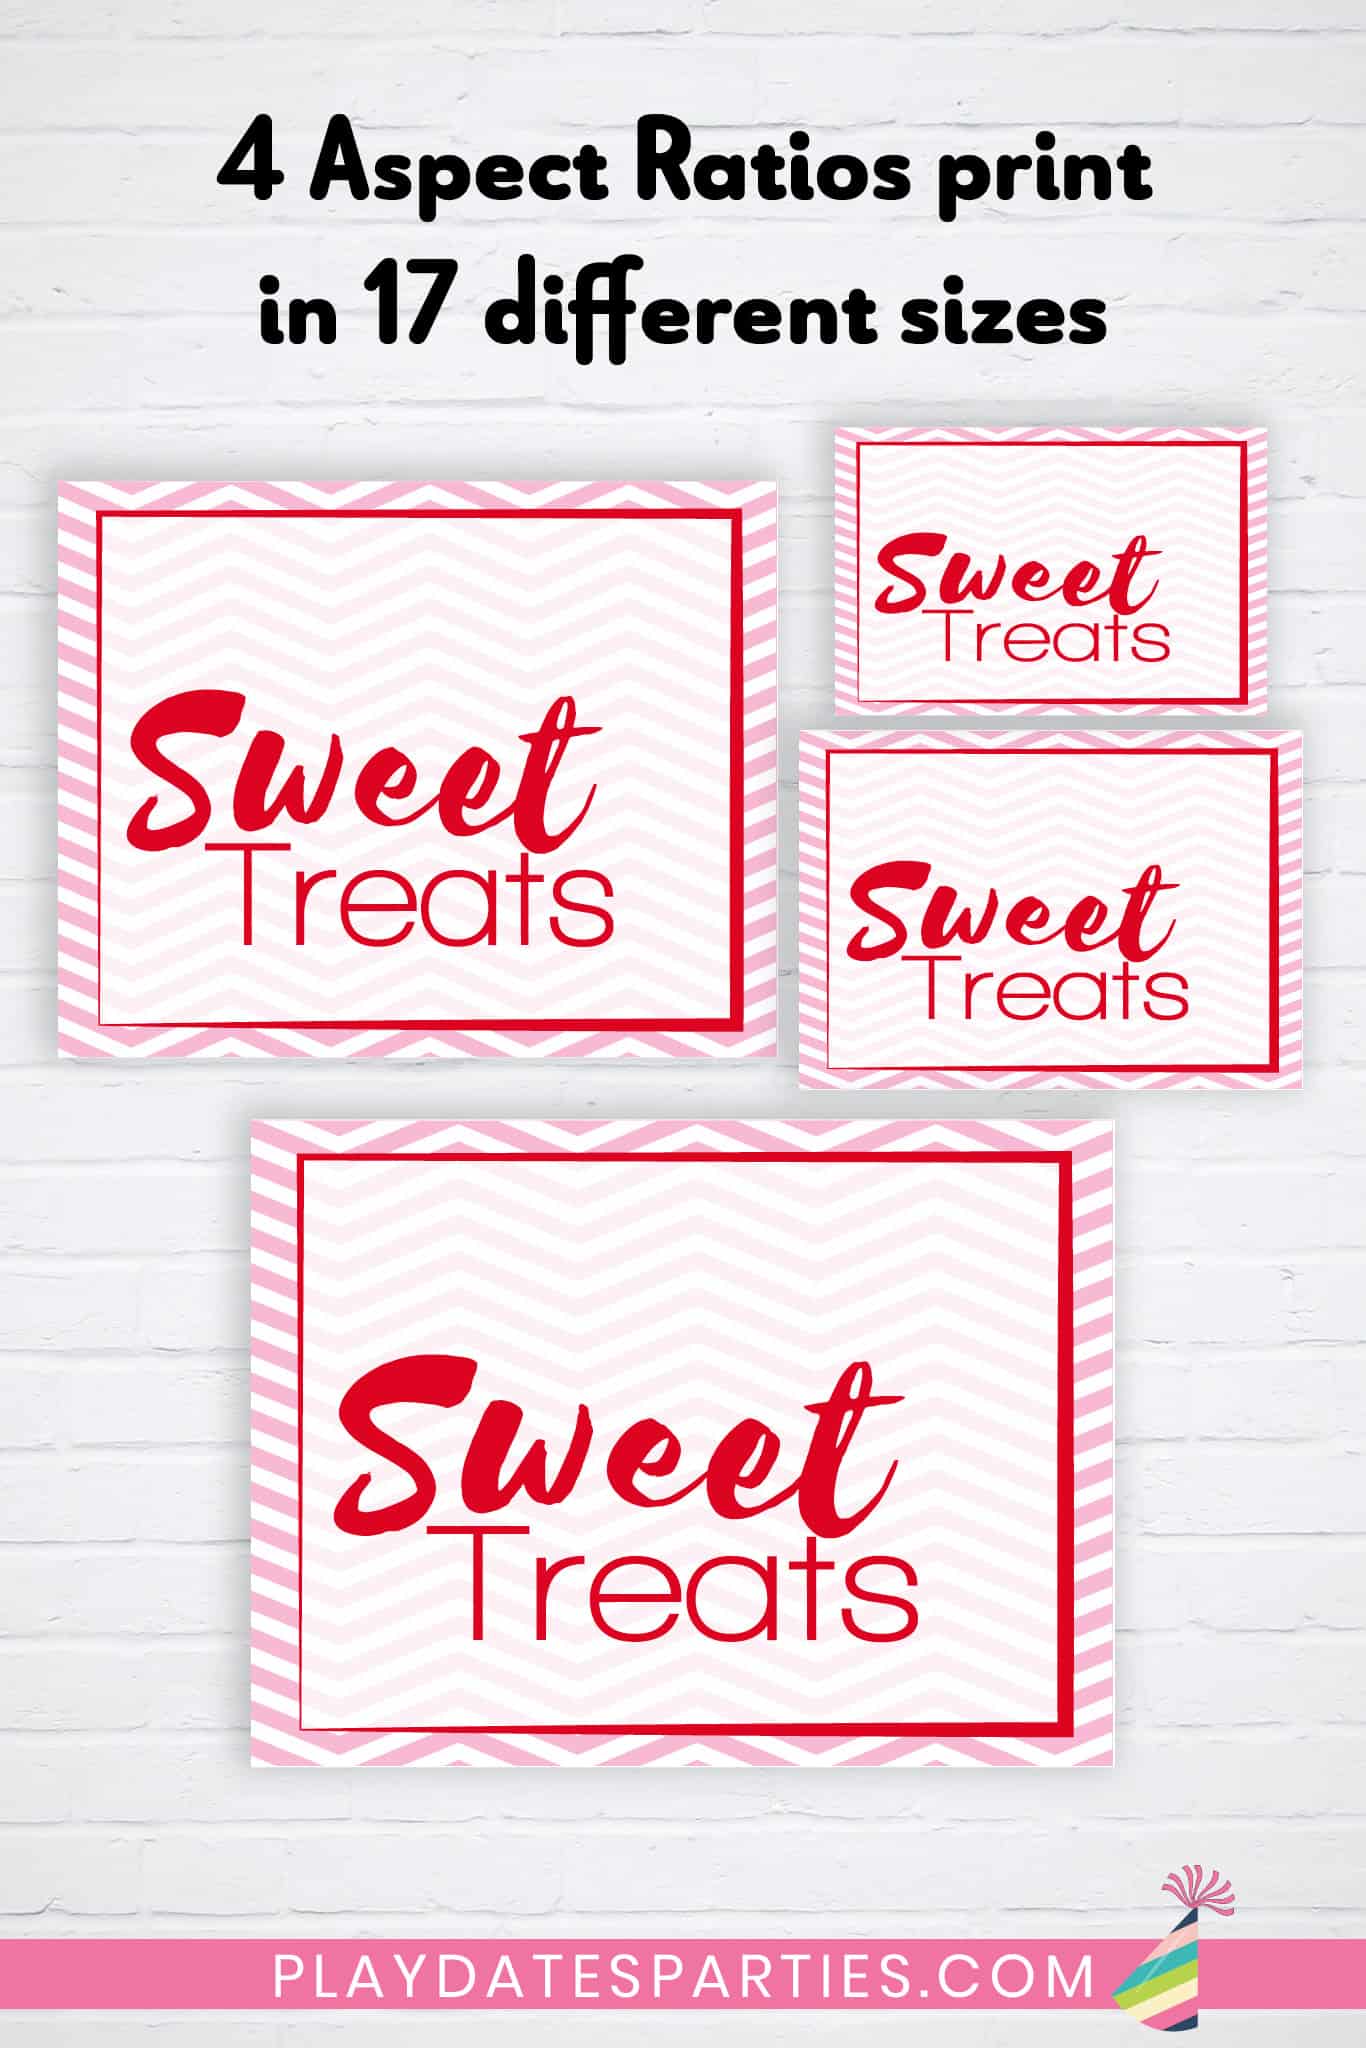 Sweet Treats Valentine's Day Party Sign